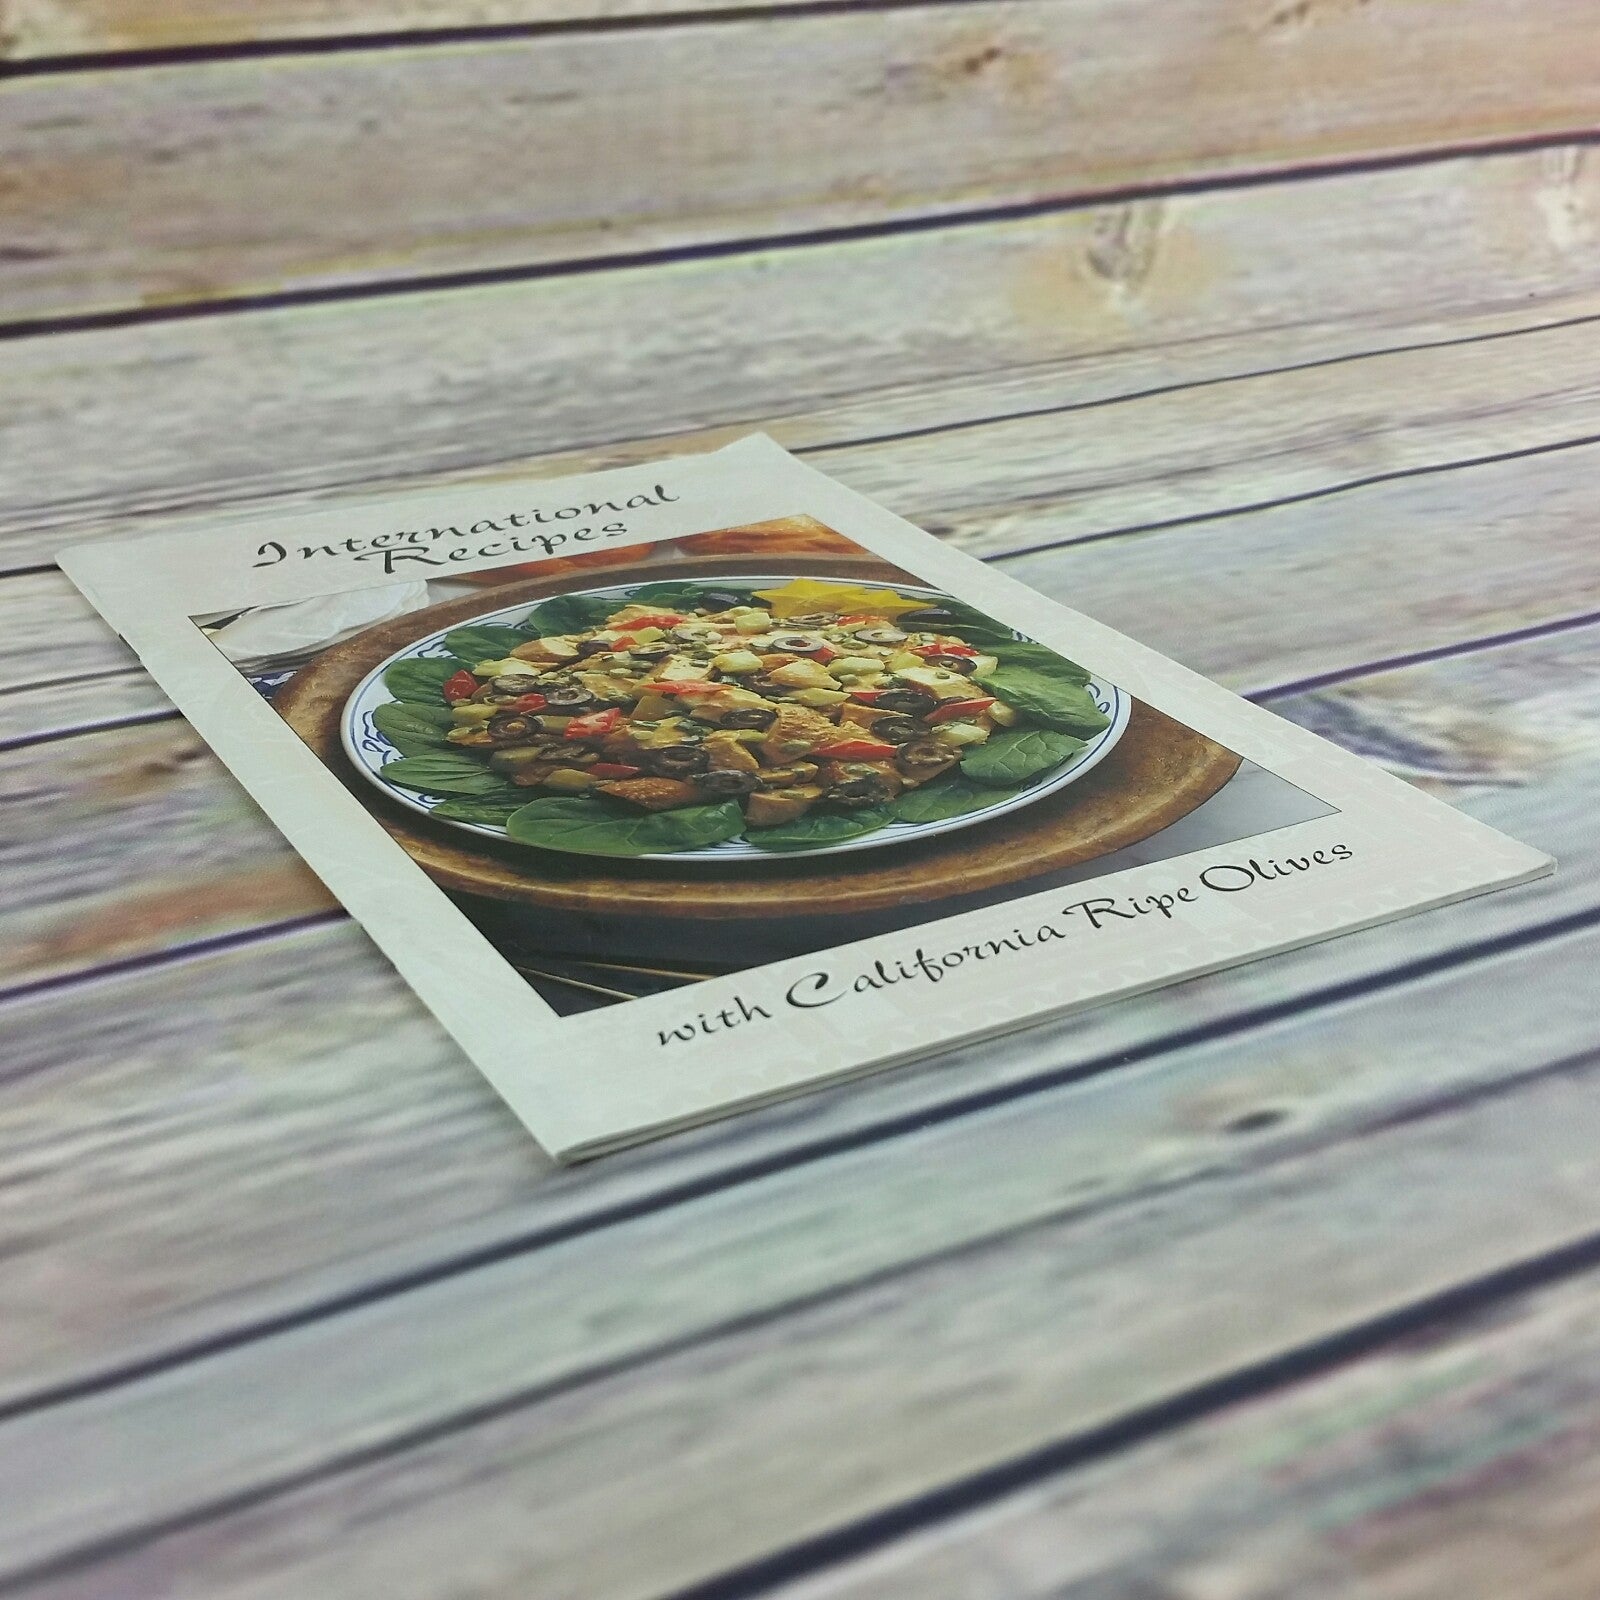 Vintage California Cookbook International Recipes with Olives 1994 Booklet - At Grandma's Table